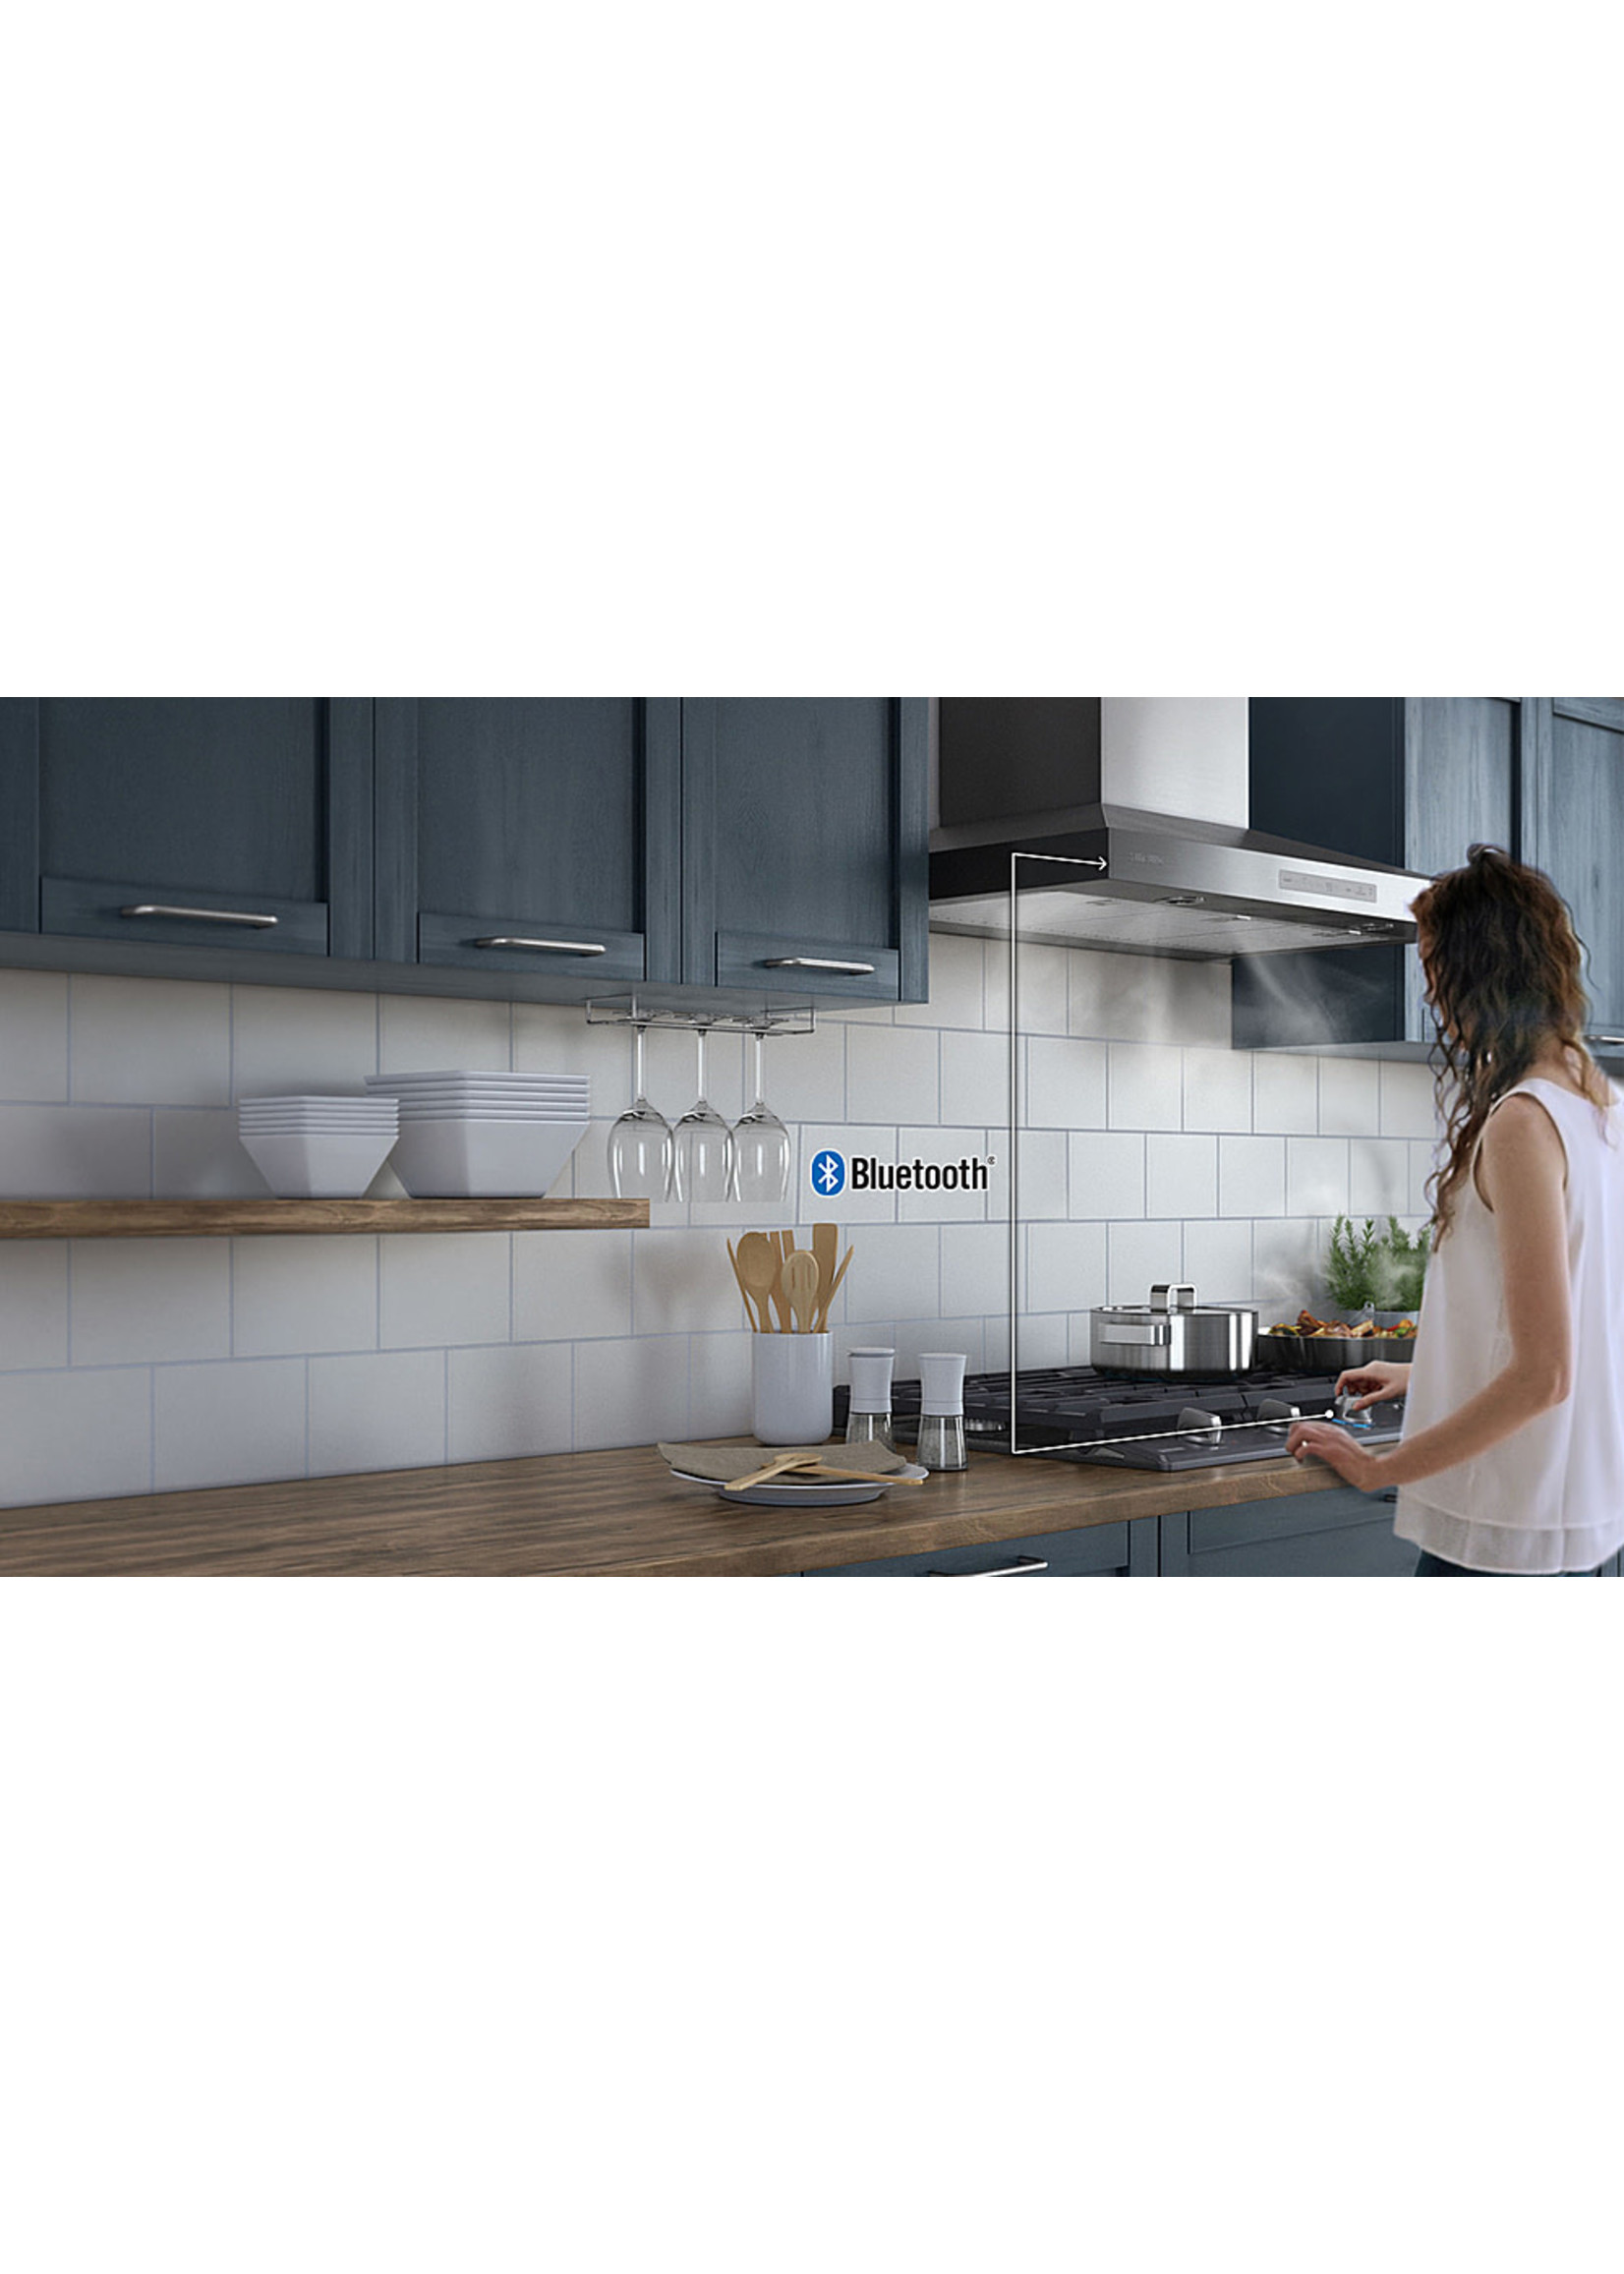 Samsung - 36" Built-In Gas Cooktop with WiFi - Black stainless steel